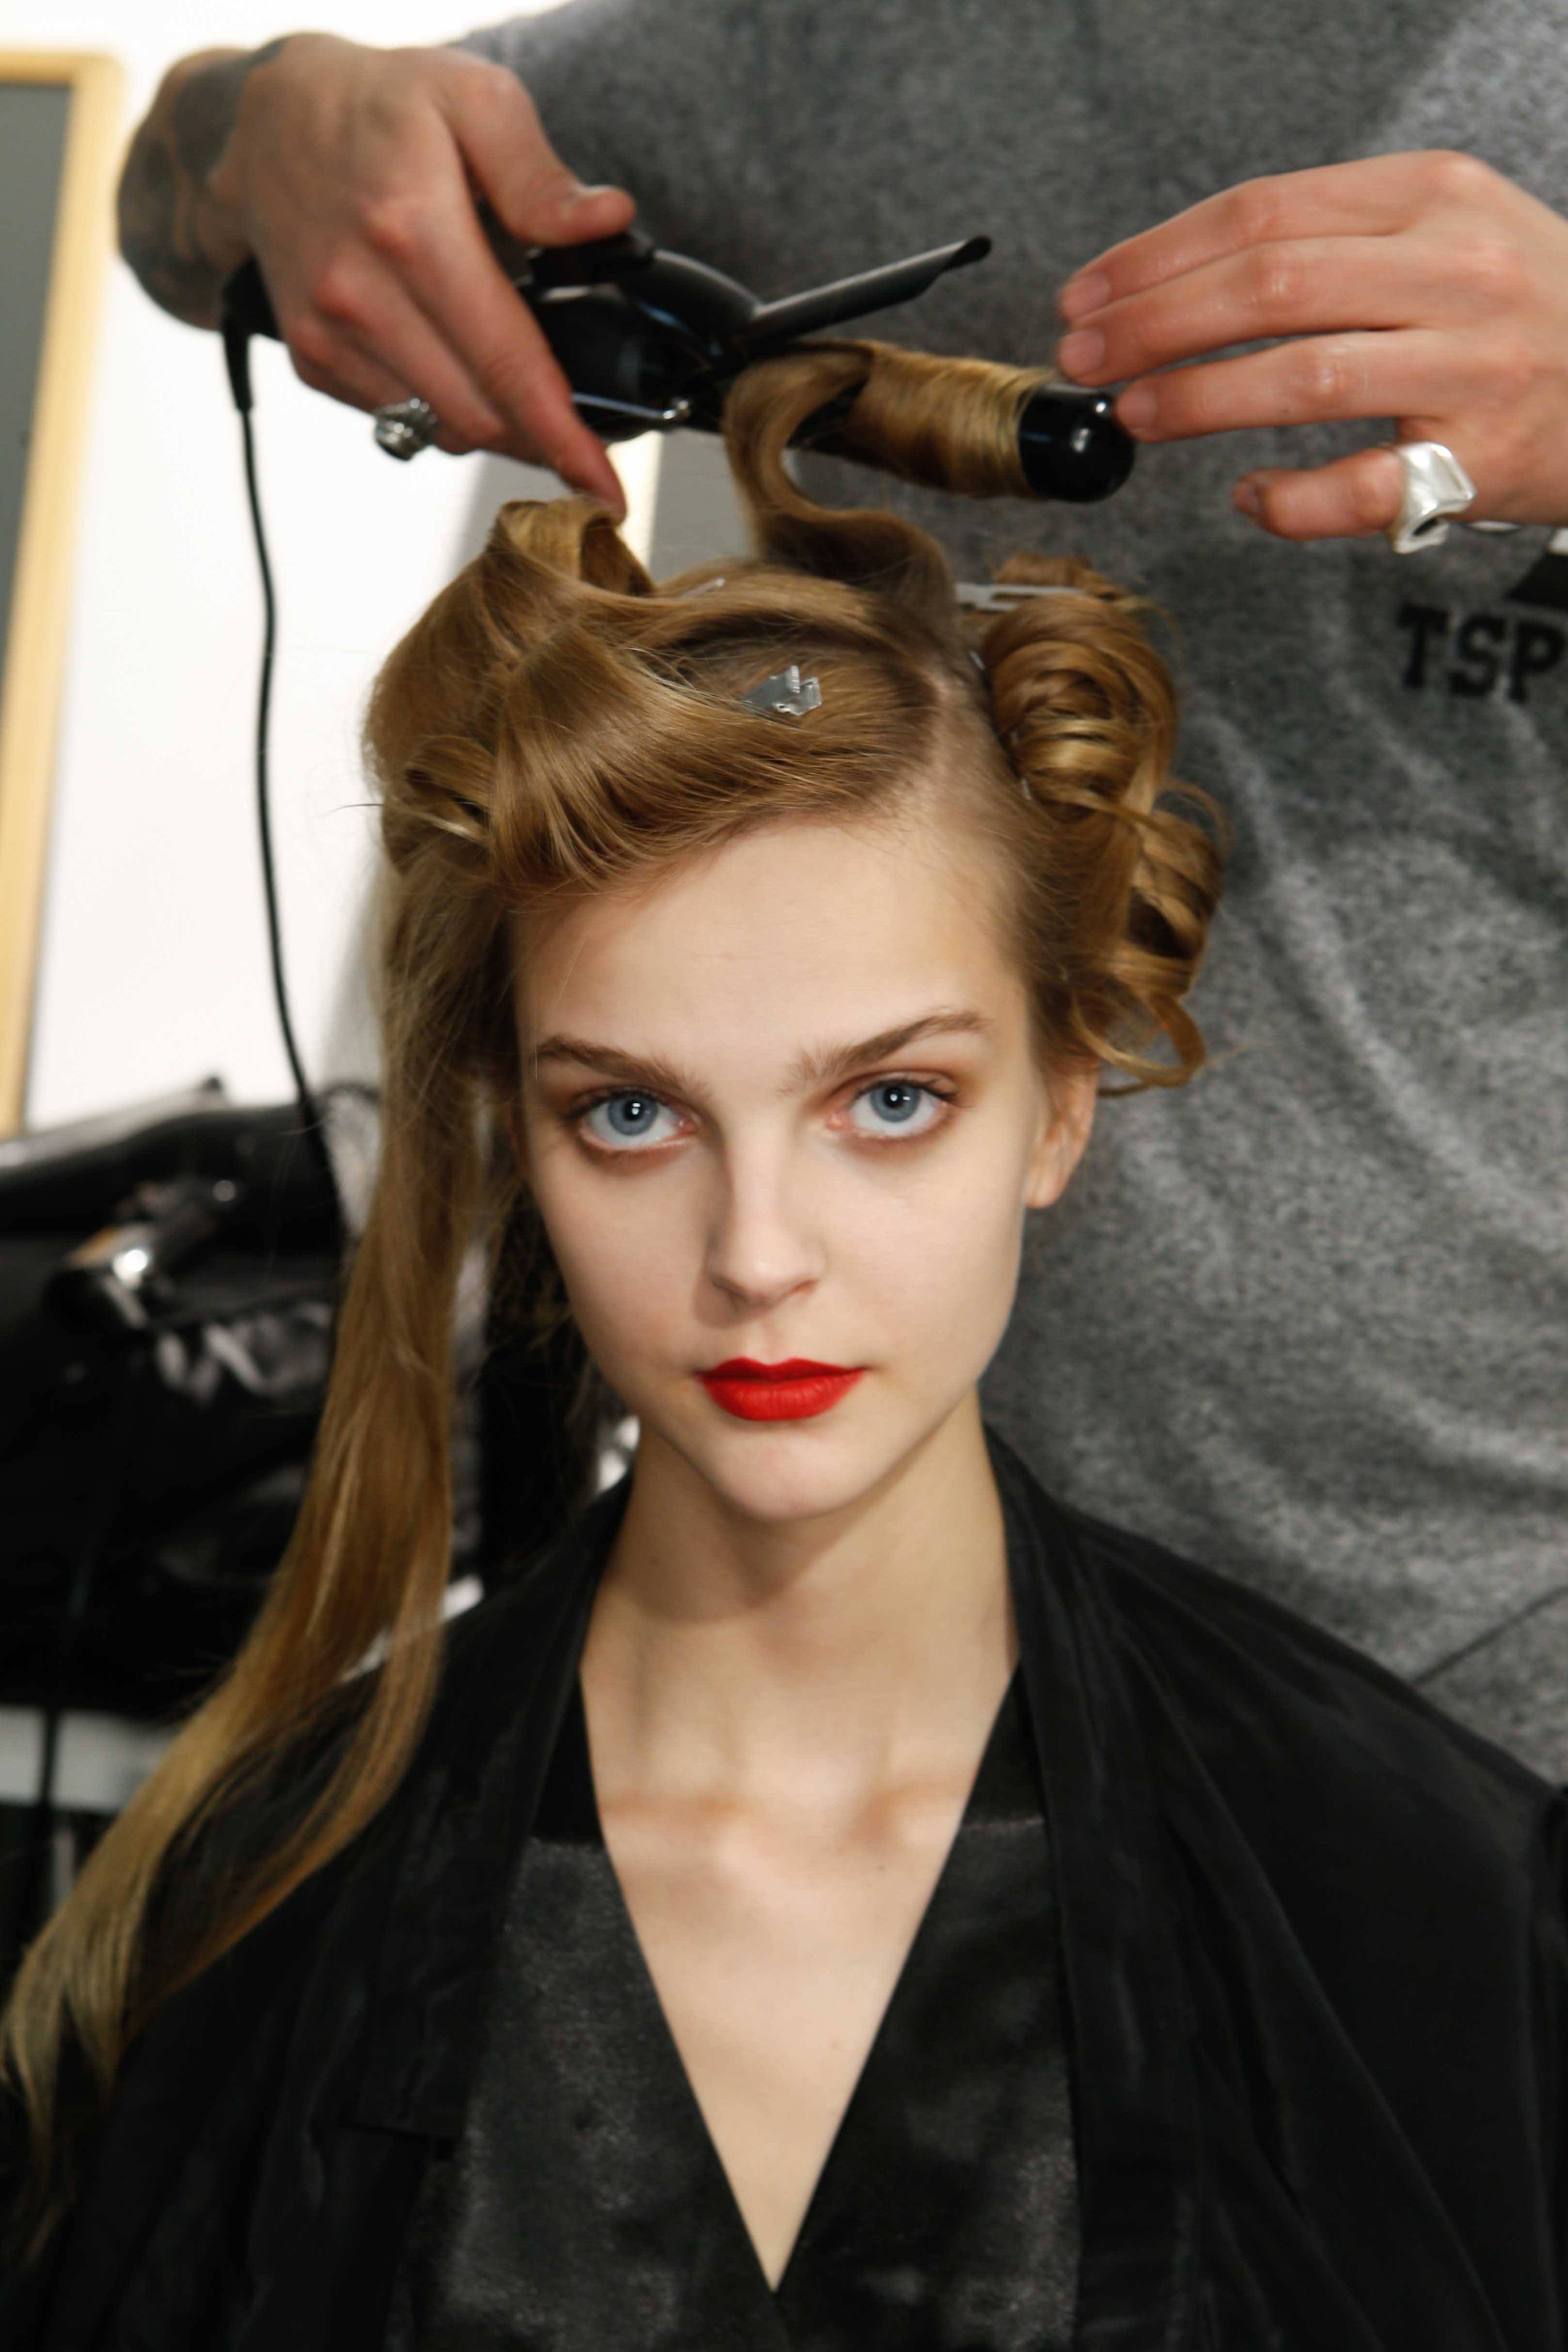 Want wavy curls? Top styling tips for learning how to curl your hair